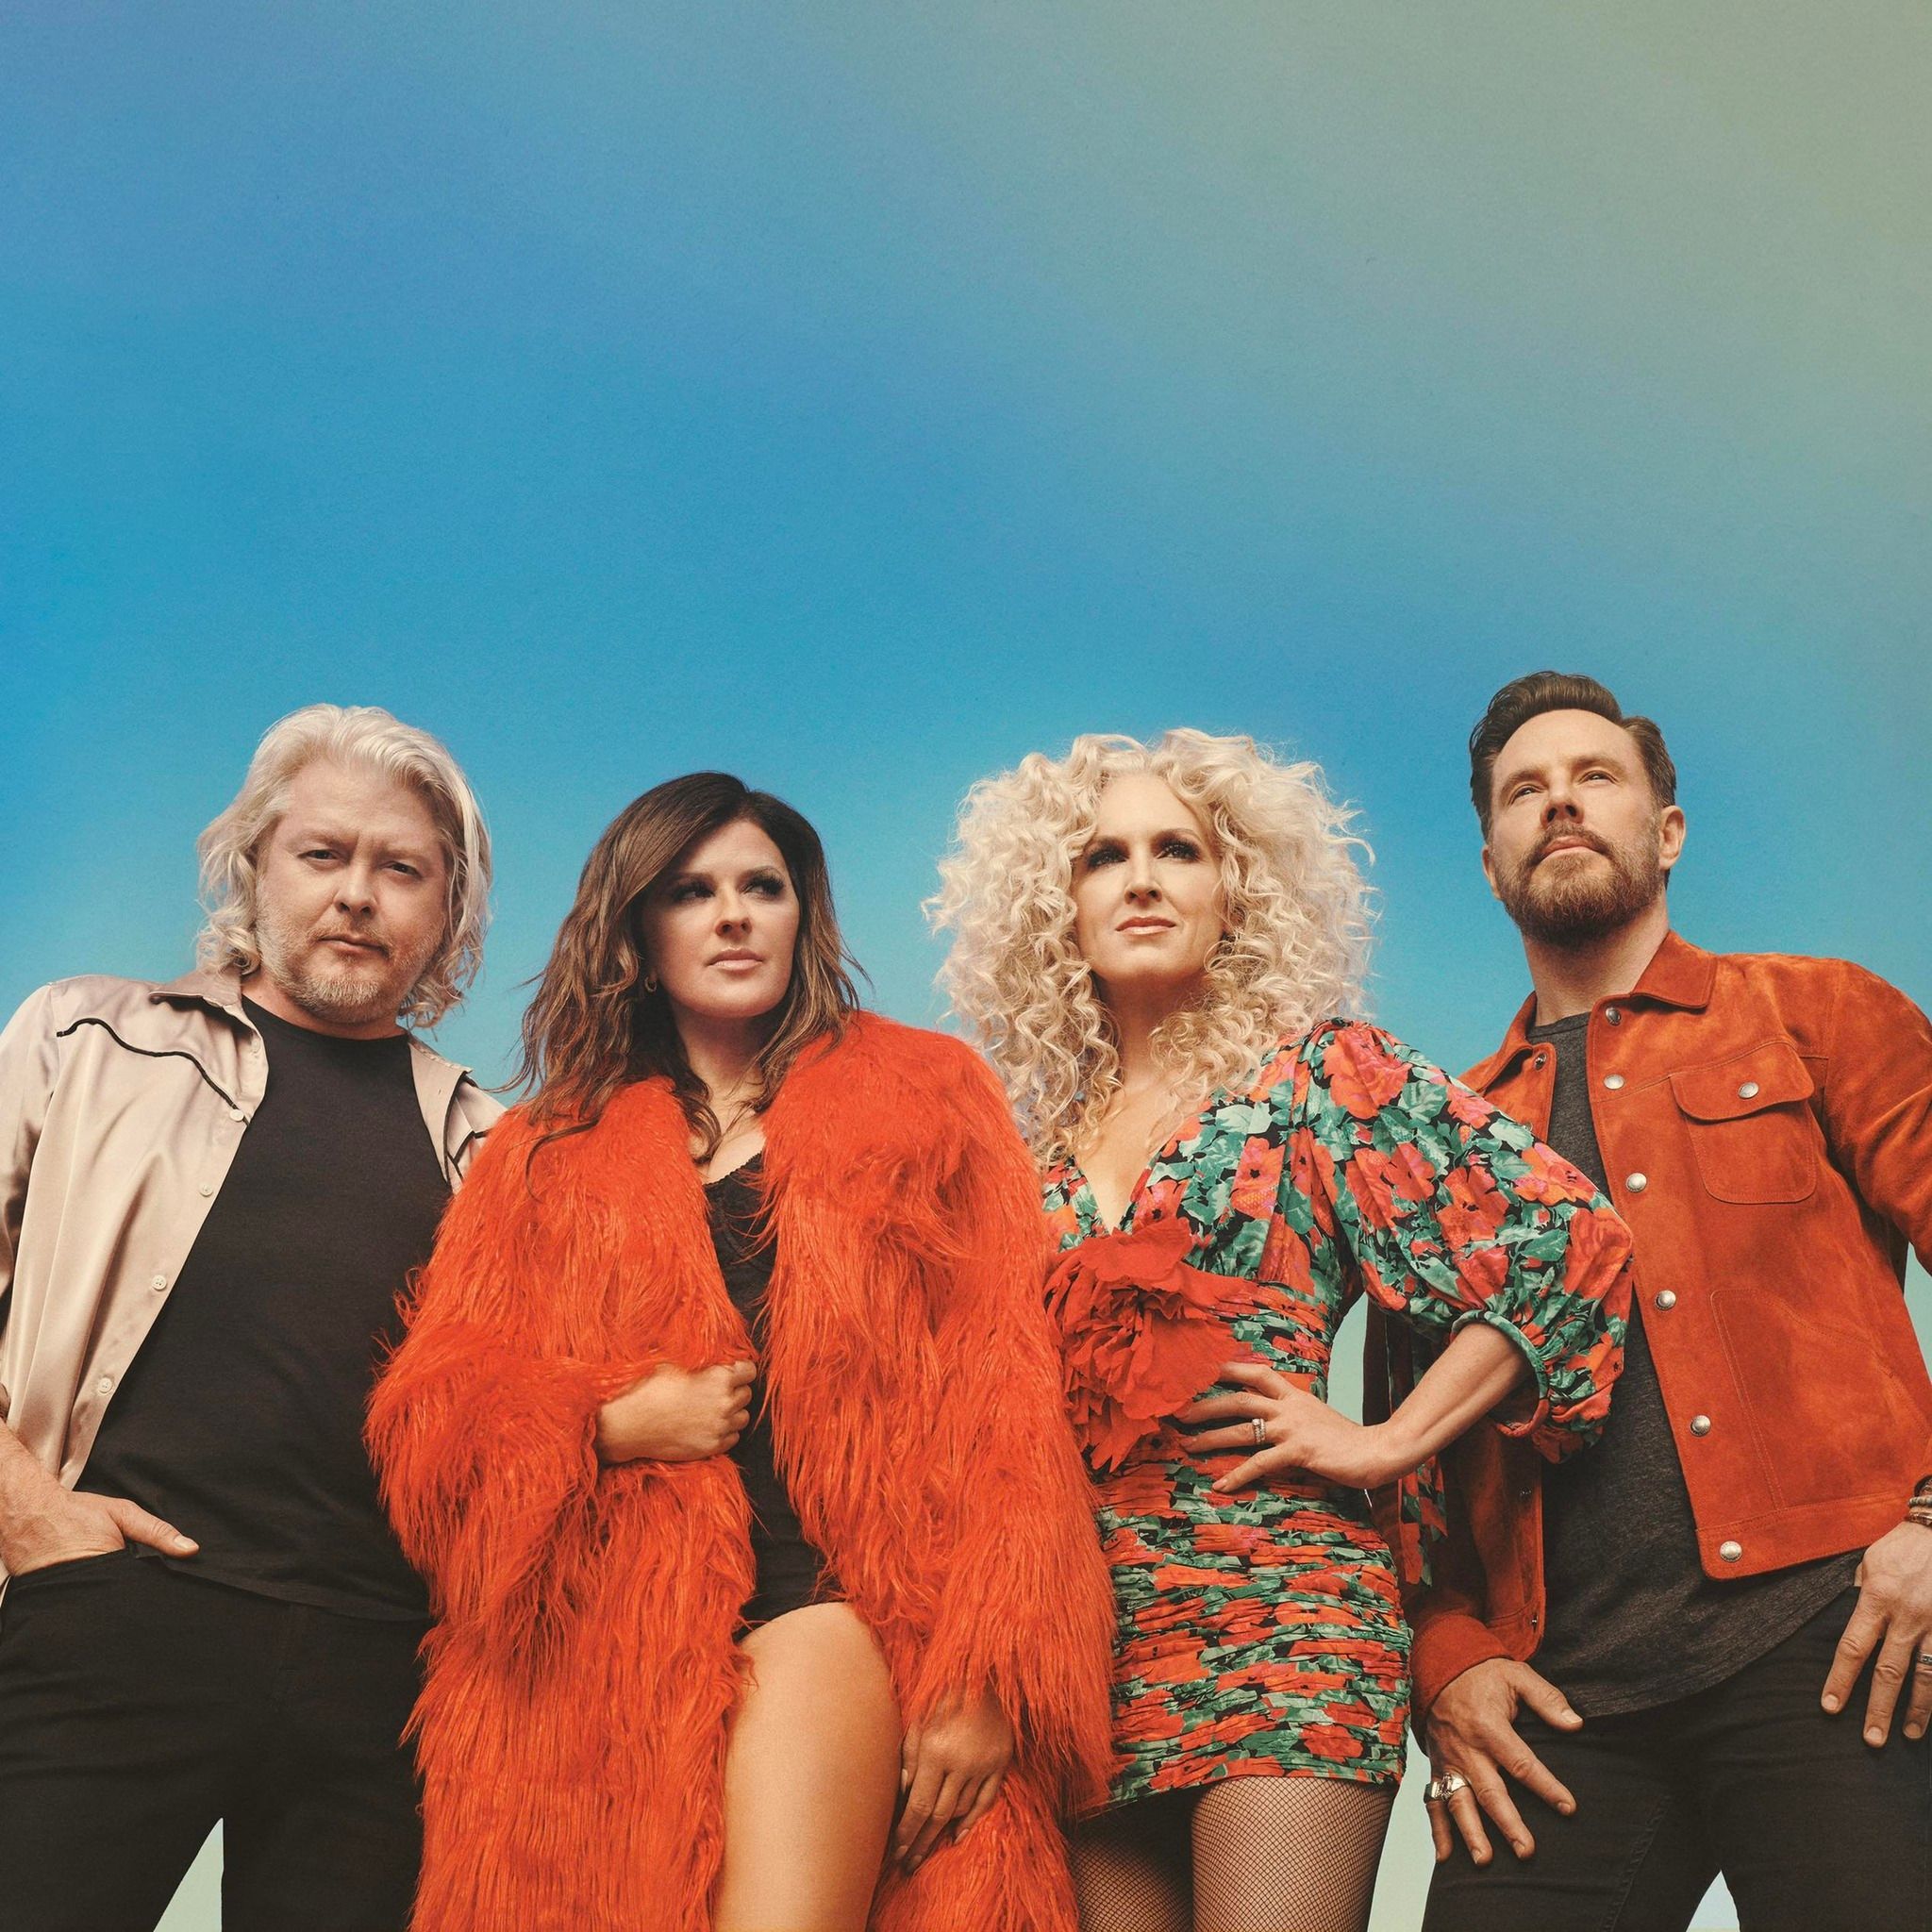 LITTLE BIG TOWN’S MR. SUN DEBUTS AS  TOP COUNTRY ALBUM BY A GROUP IN 2022